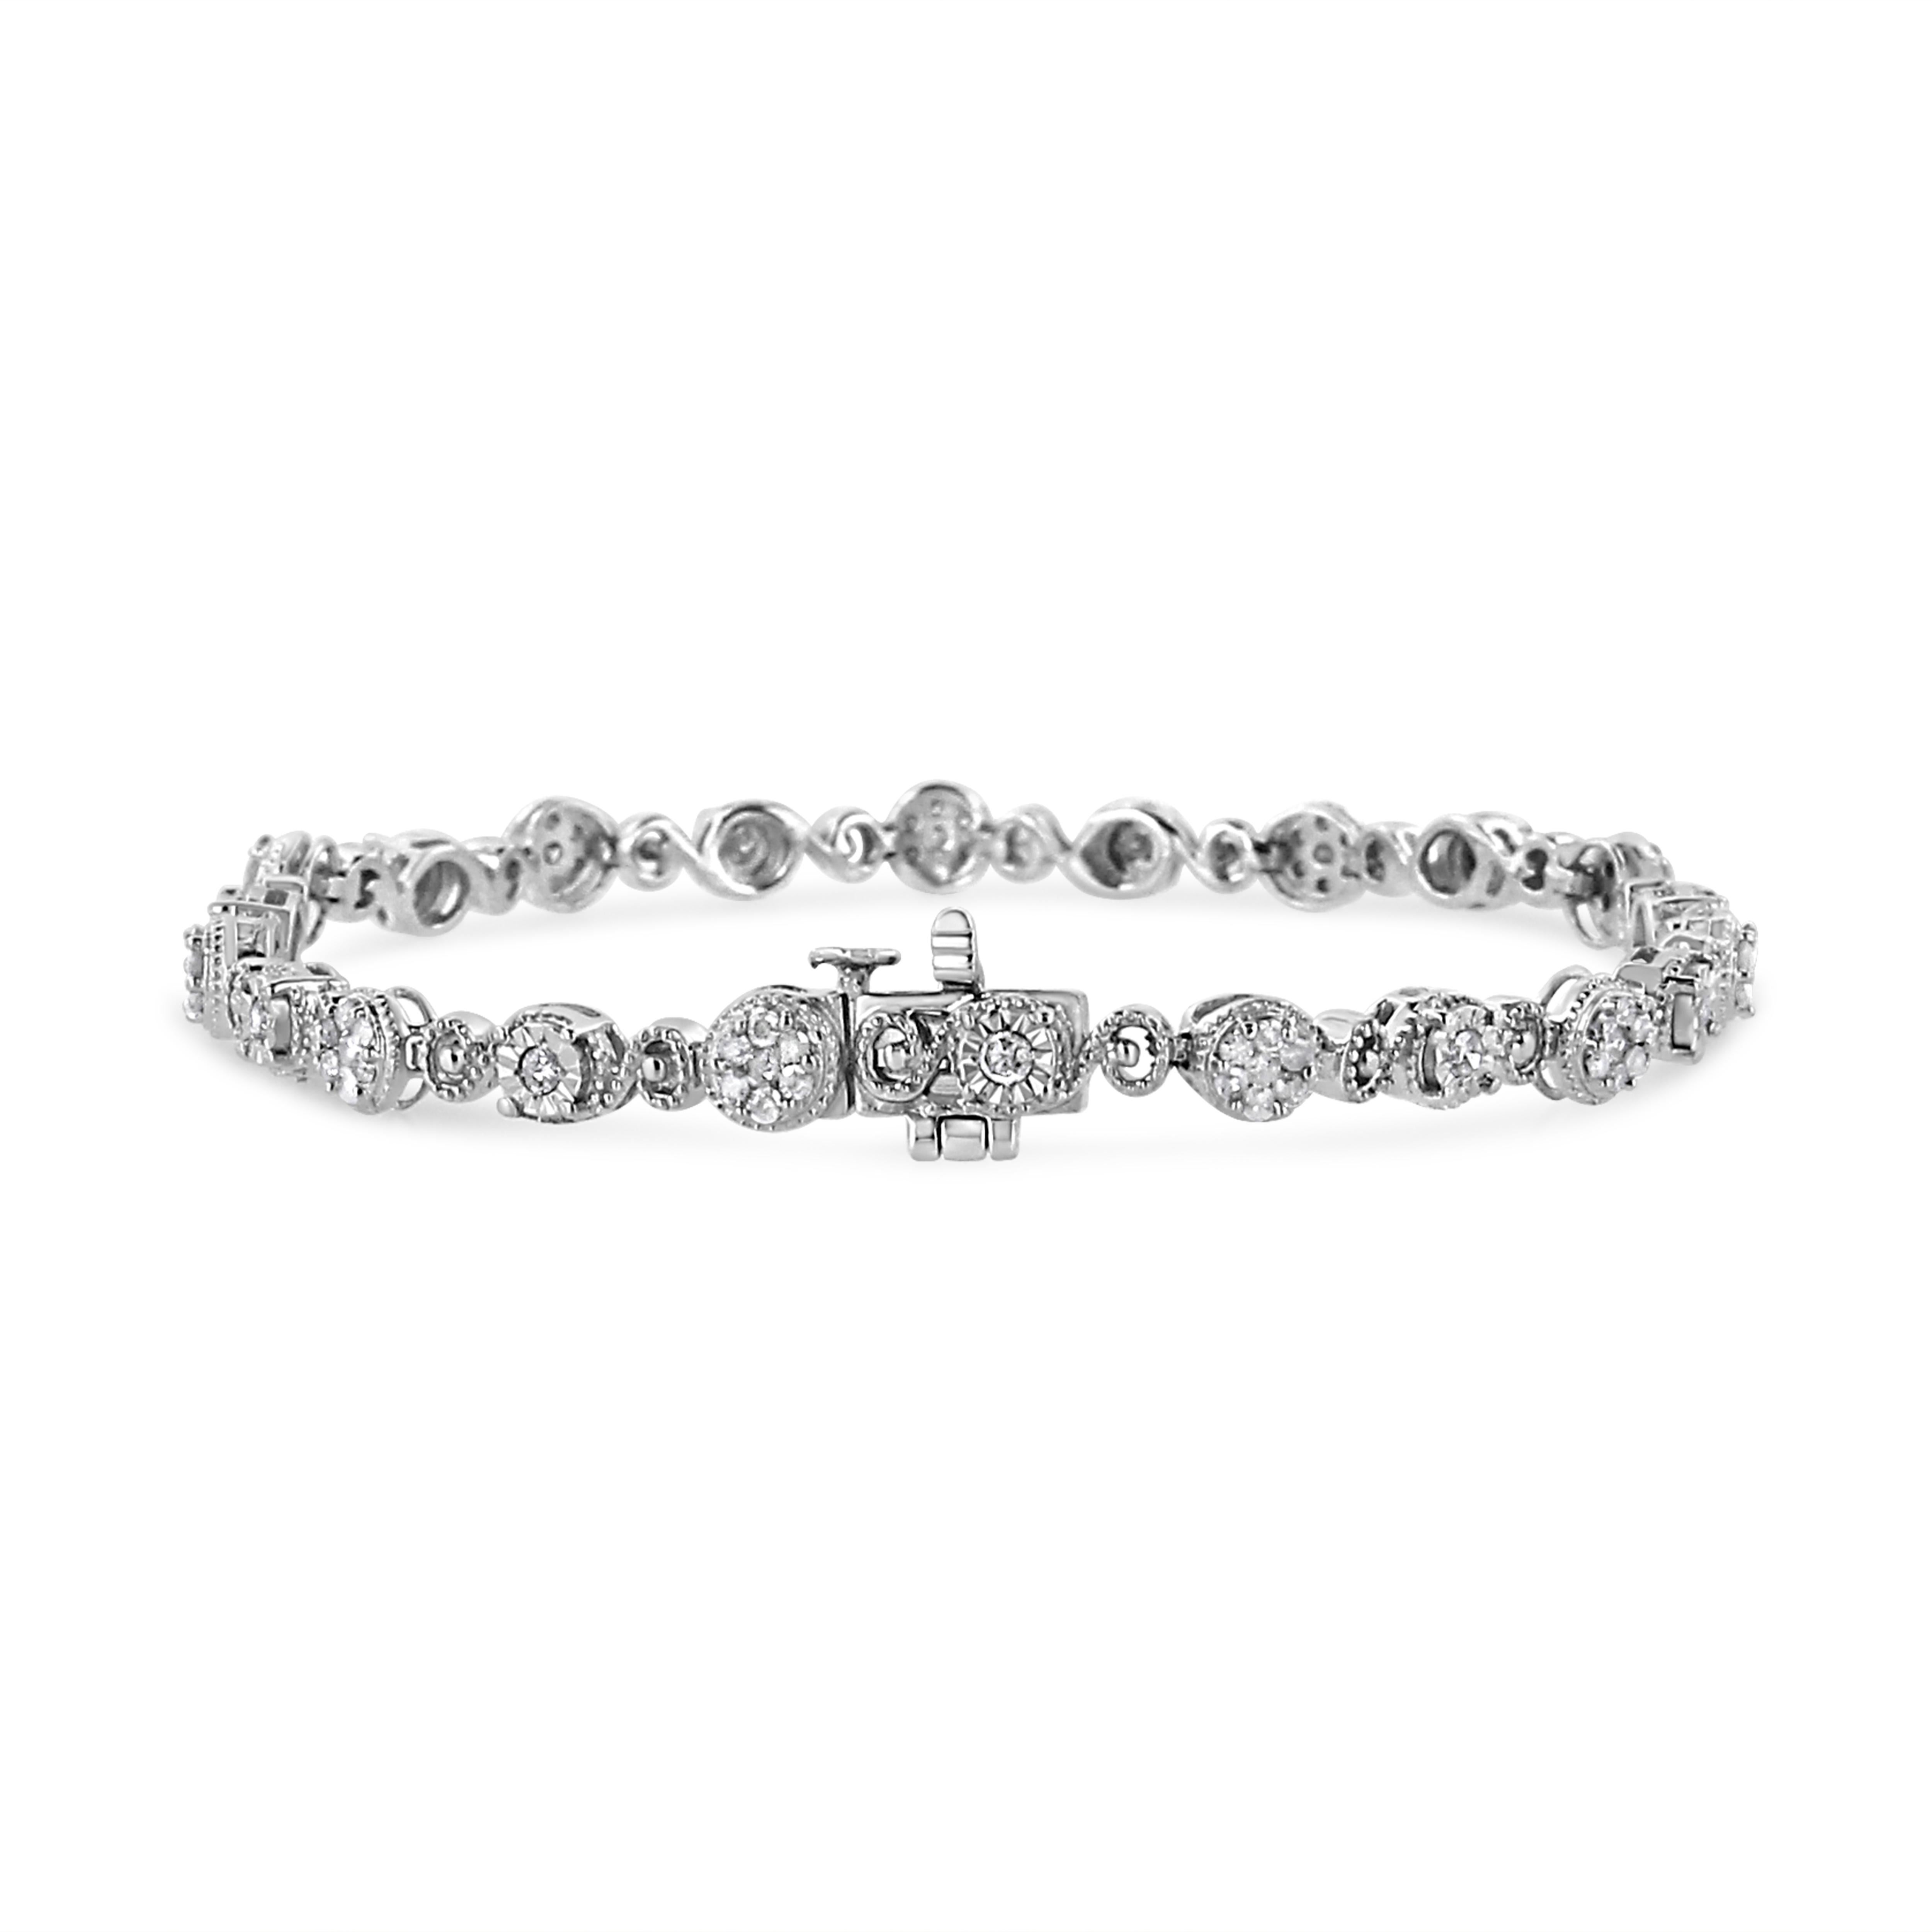 Update your look with this gorgeous, swirling diamond link bracelet. Crafted from cool weaves of .925 sterling silver, this embellished style features single diamonds artfully set to enhance size and sparkle alternating with round diamond